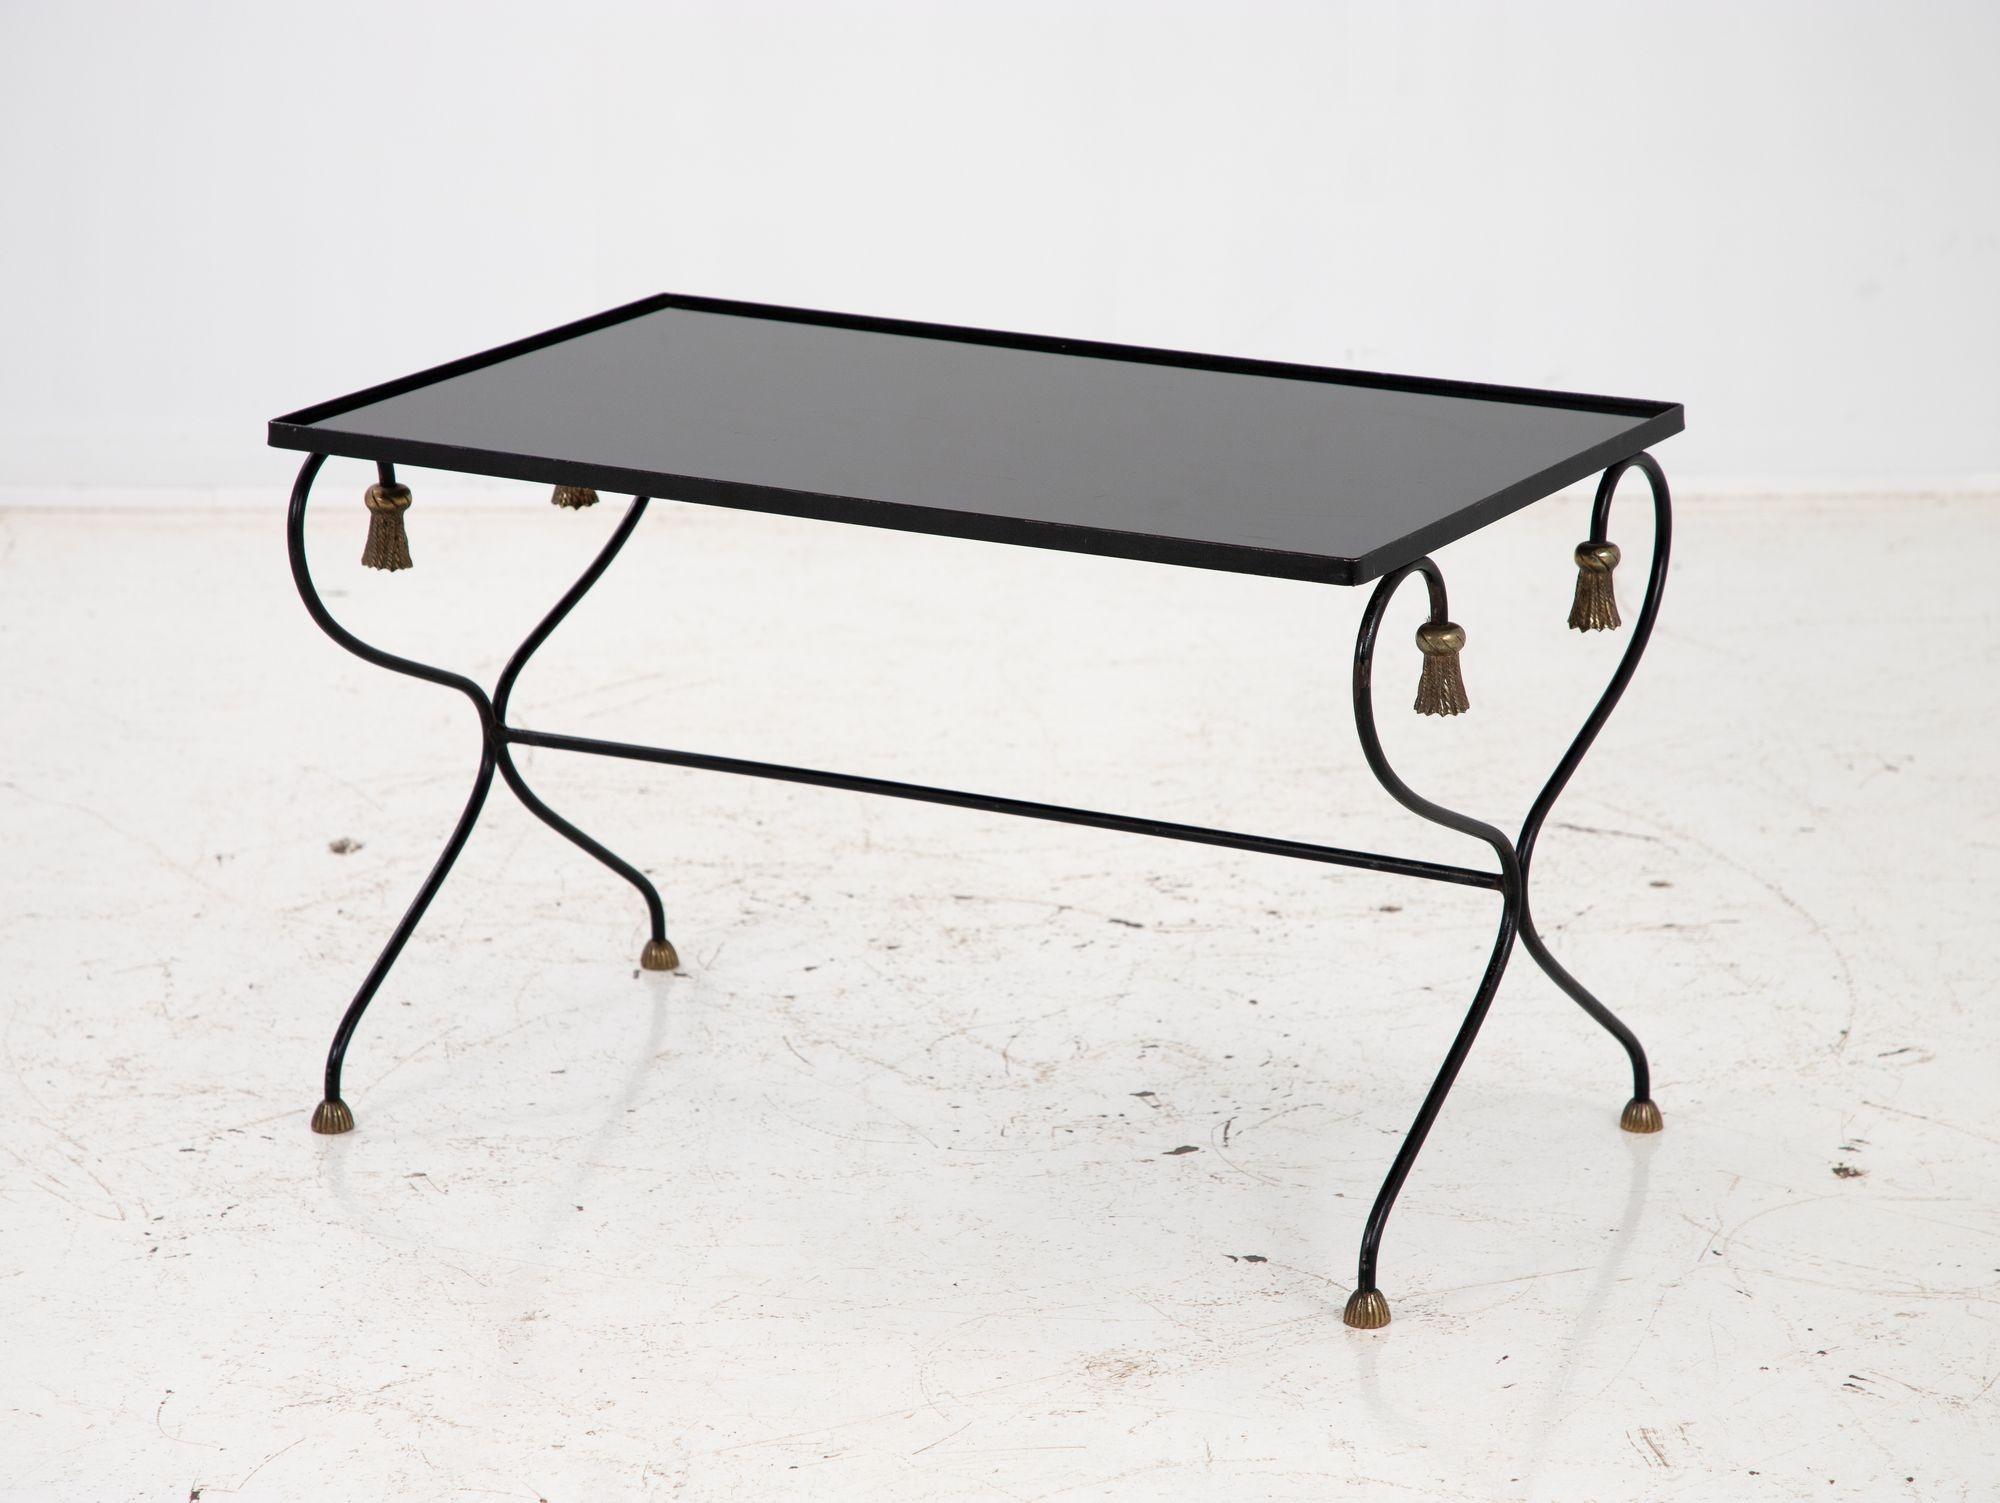 A 20th Century iron and black glass cocktail table is a stunning piece of furniture that will make a bold statement in any living space. This table features a sleek black glass top that offers space for displaying your favorite decor items or